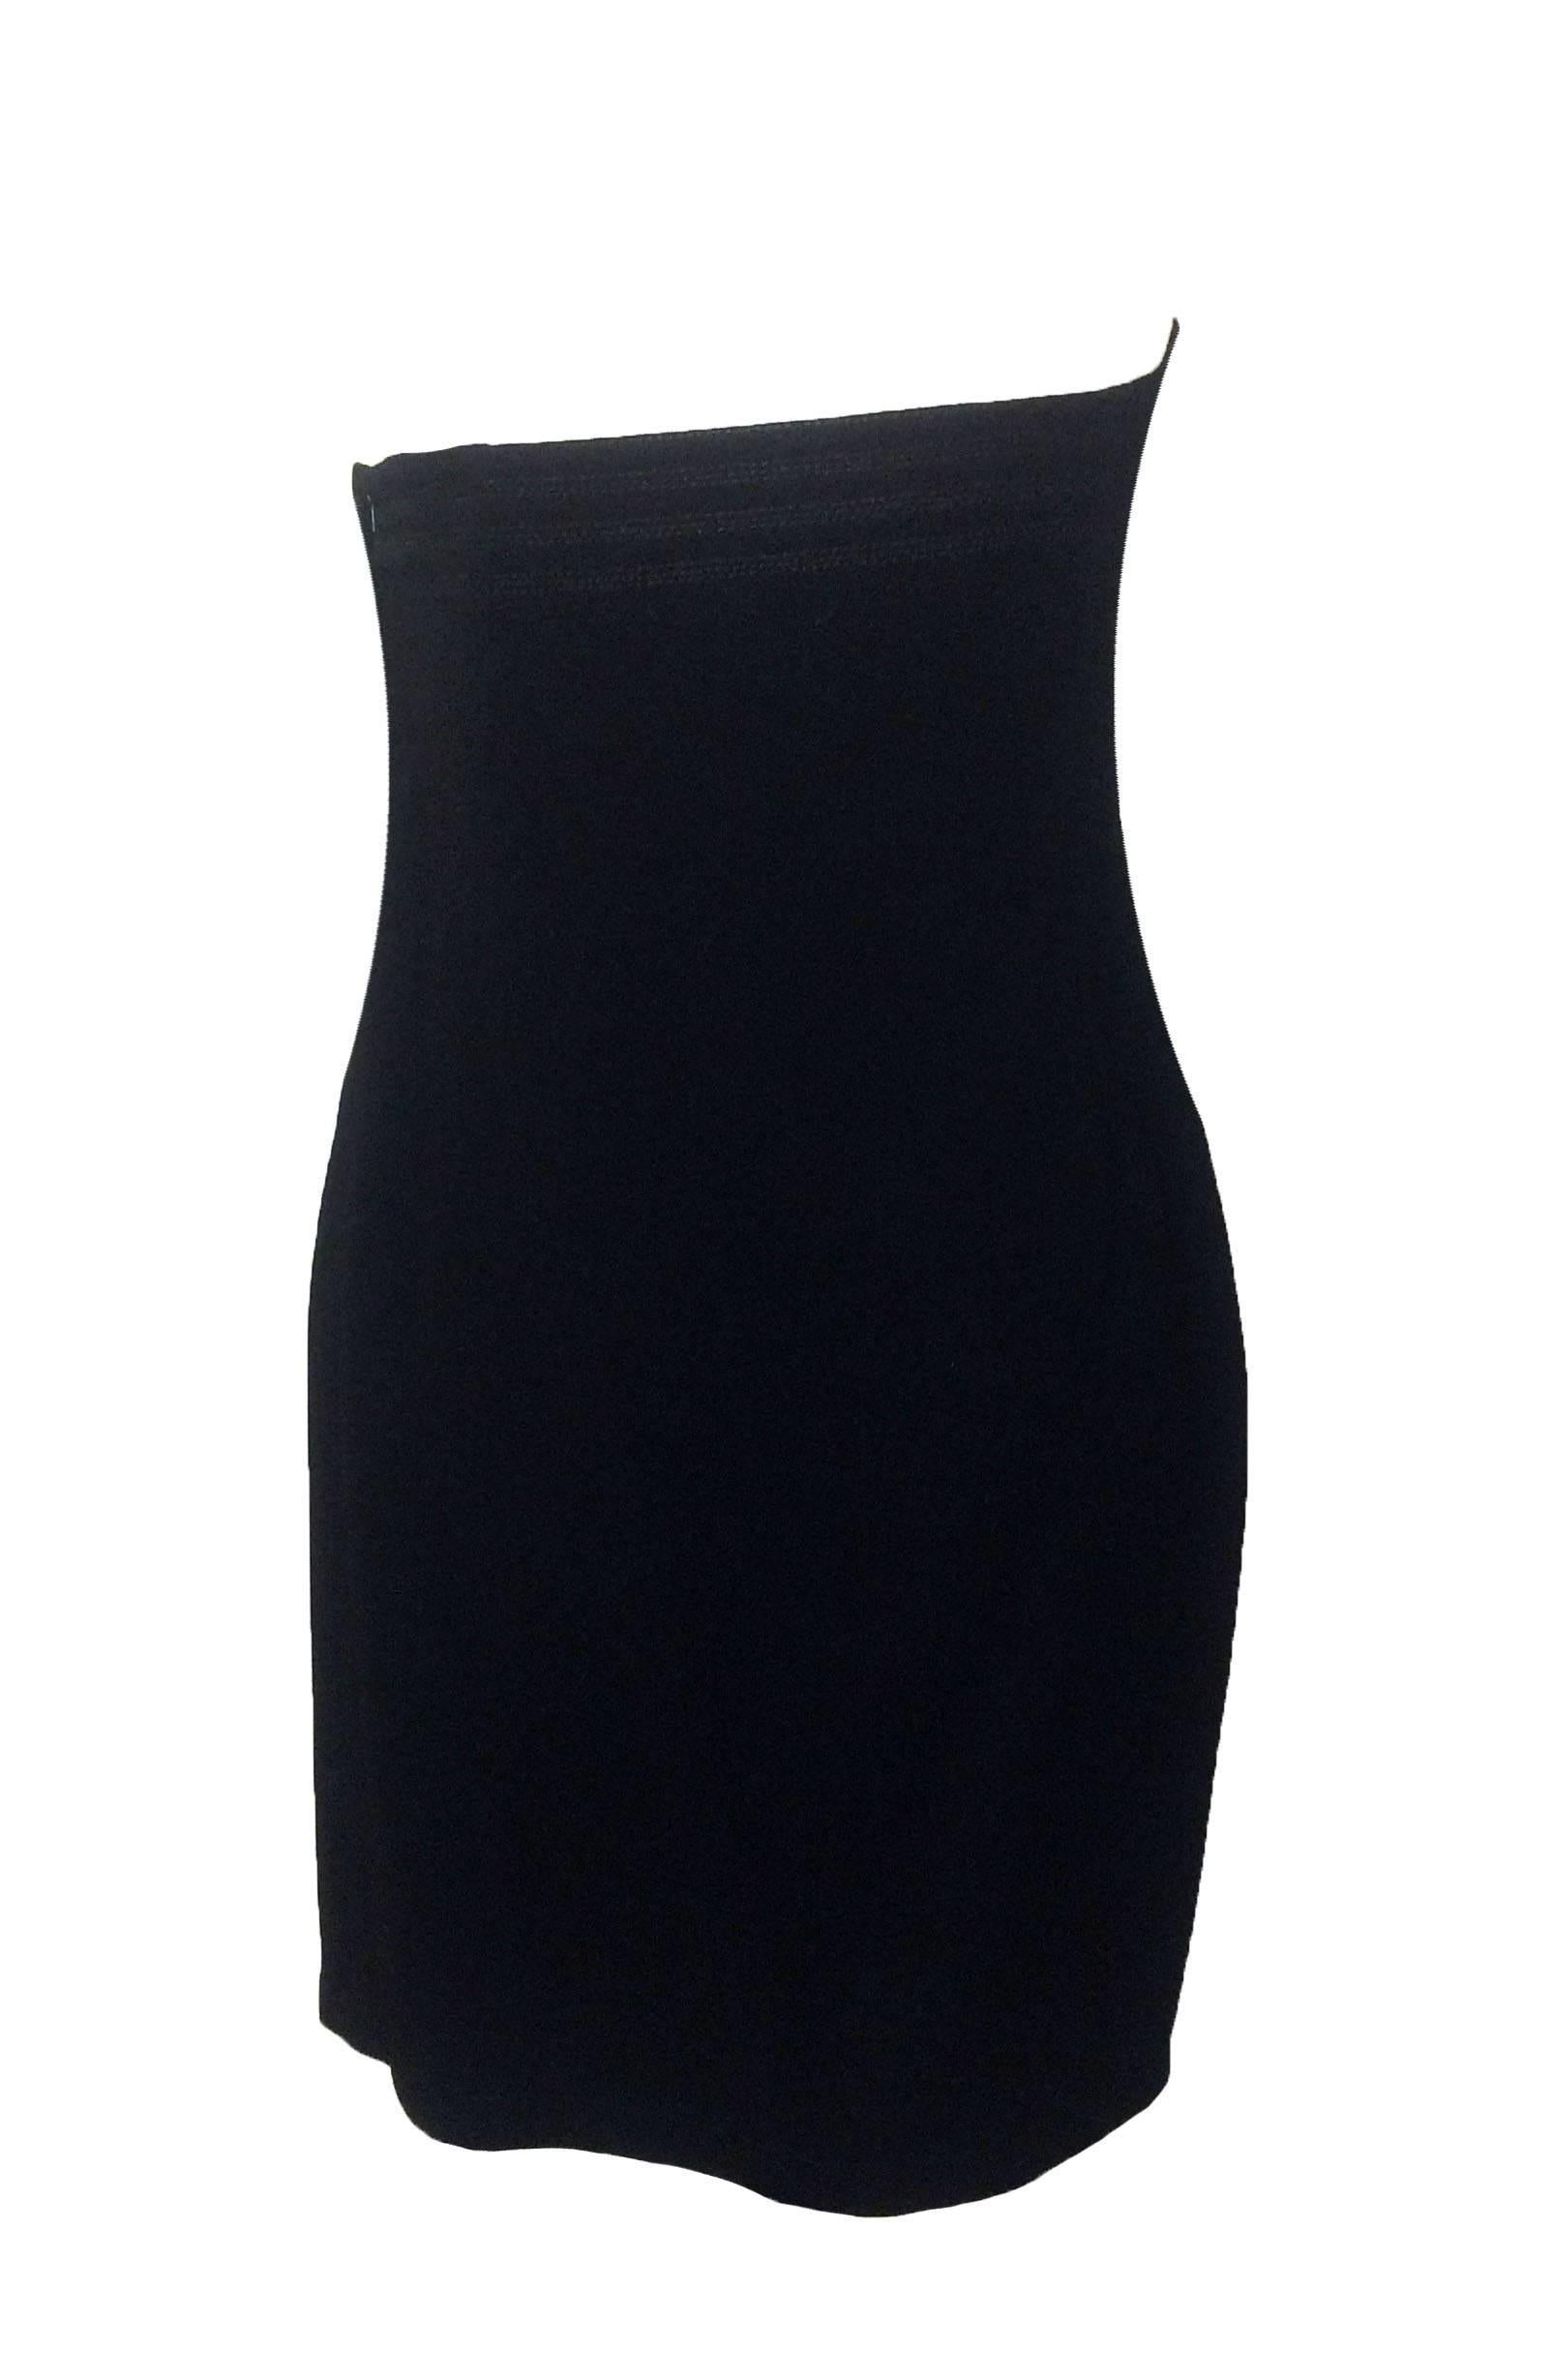 Gianni Versace 90s little black dress with an asymmetrical curve and seamed detailing at chest. Interior boning, side zip. Lining at bust that fastens at side with three buttons for support/shaping.

(Was shown on the runway with an asymmetrically